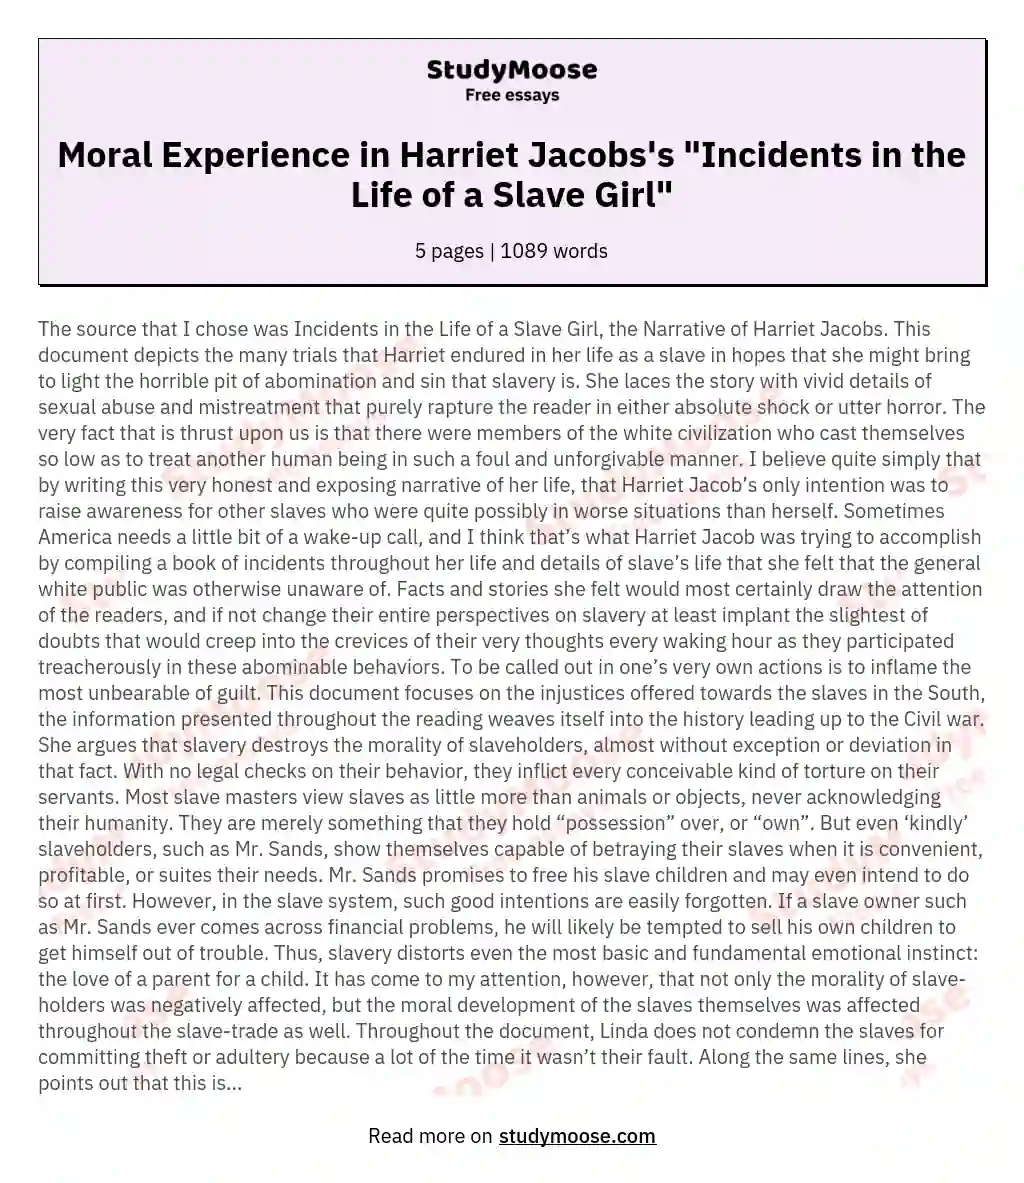 Moral Experience in Harriet Jacobs's "Incidents in the Life of a Slave Girl"